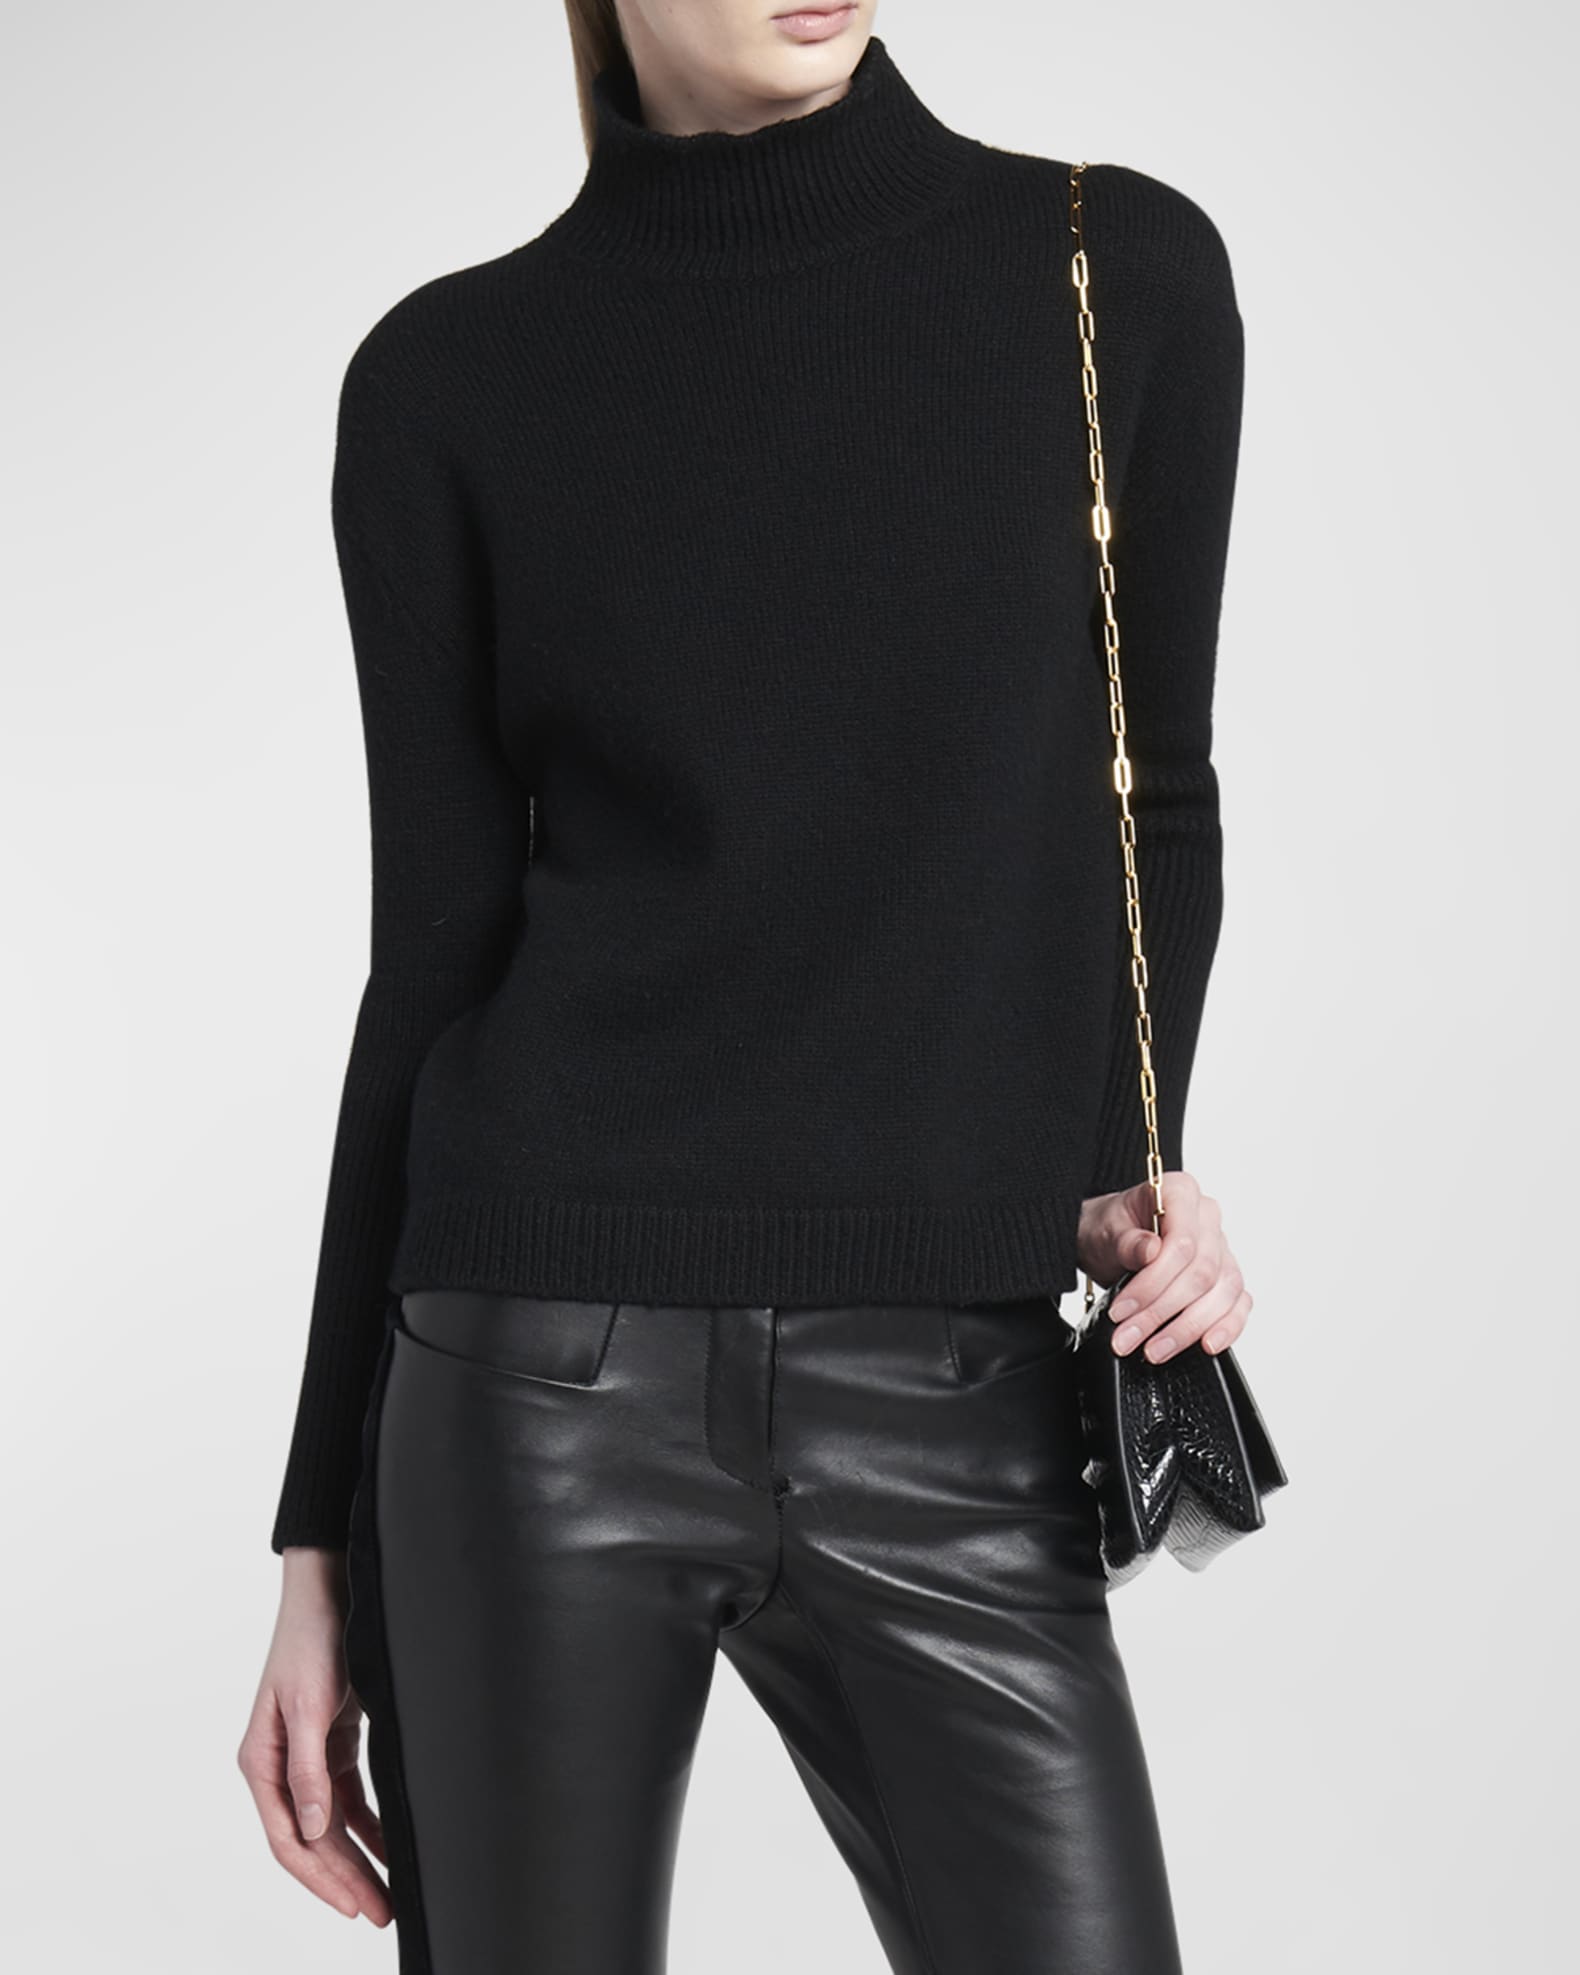 TOM FORD Turtleneck Chunky Wool-Cashmere Sweater, 5gg | Neiman Marcus